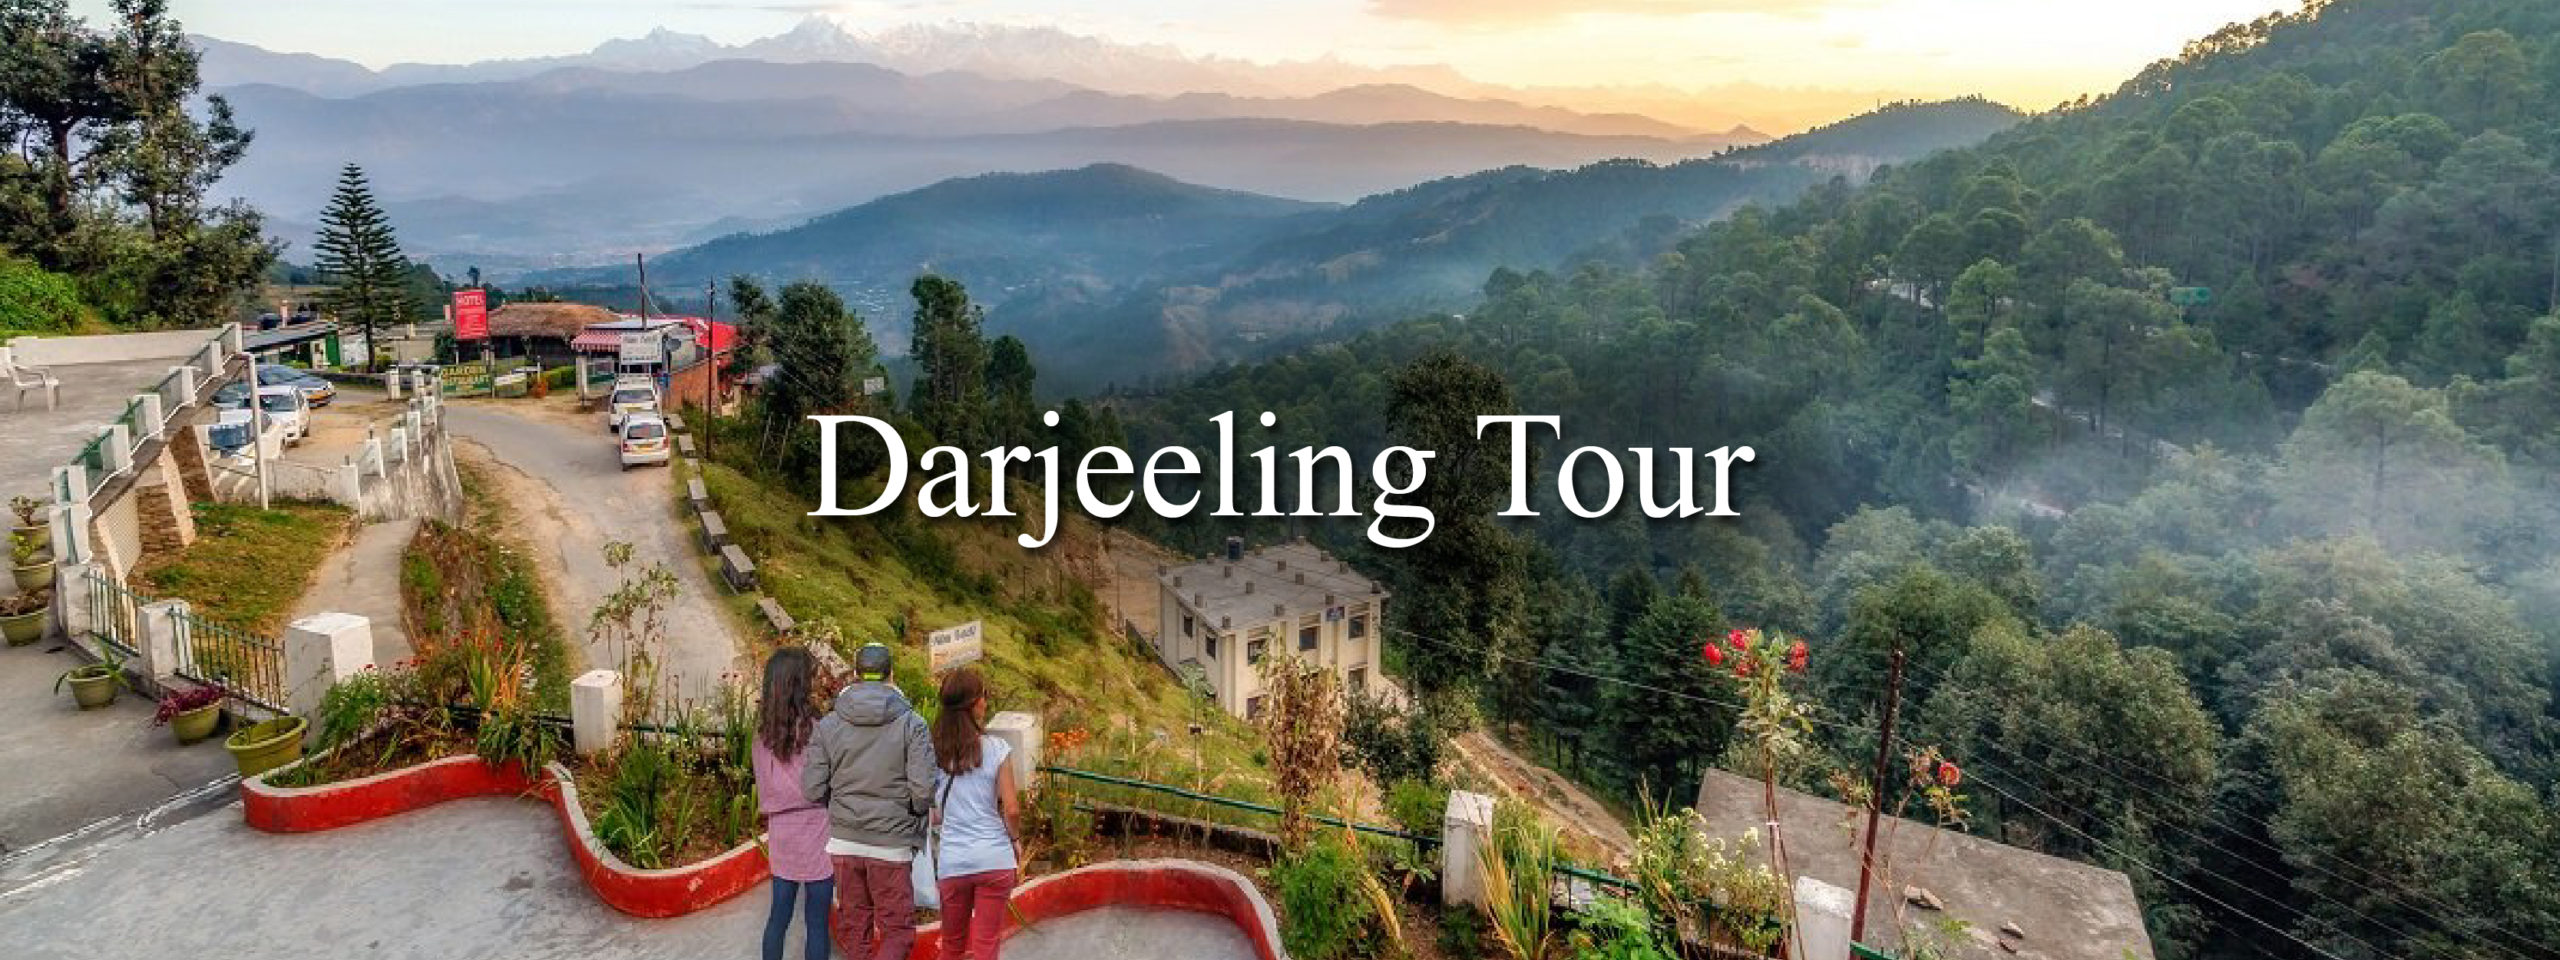 how much does darjeeling trip cost